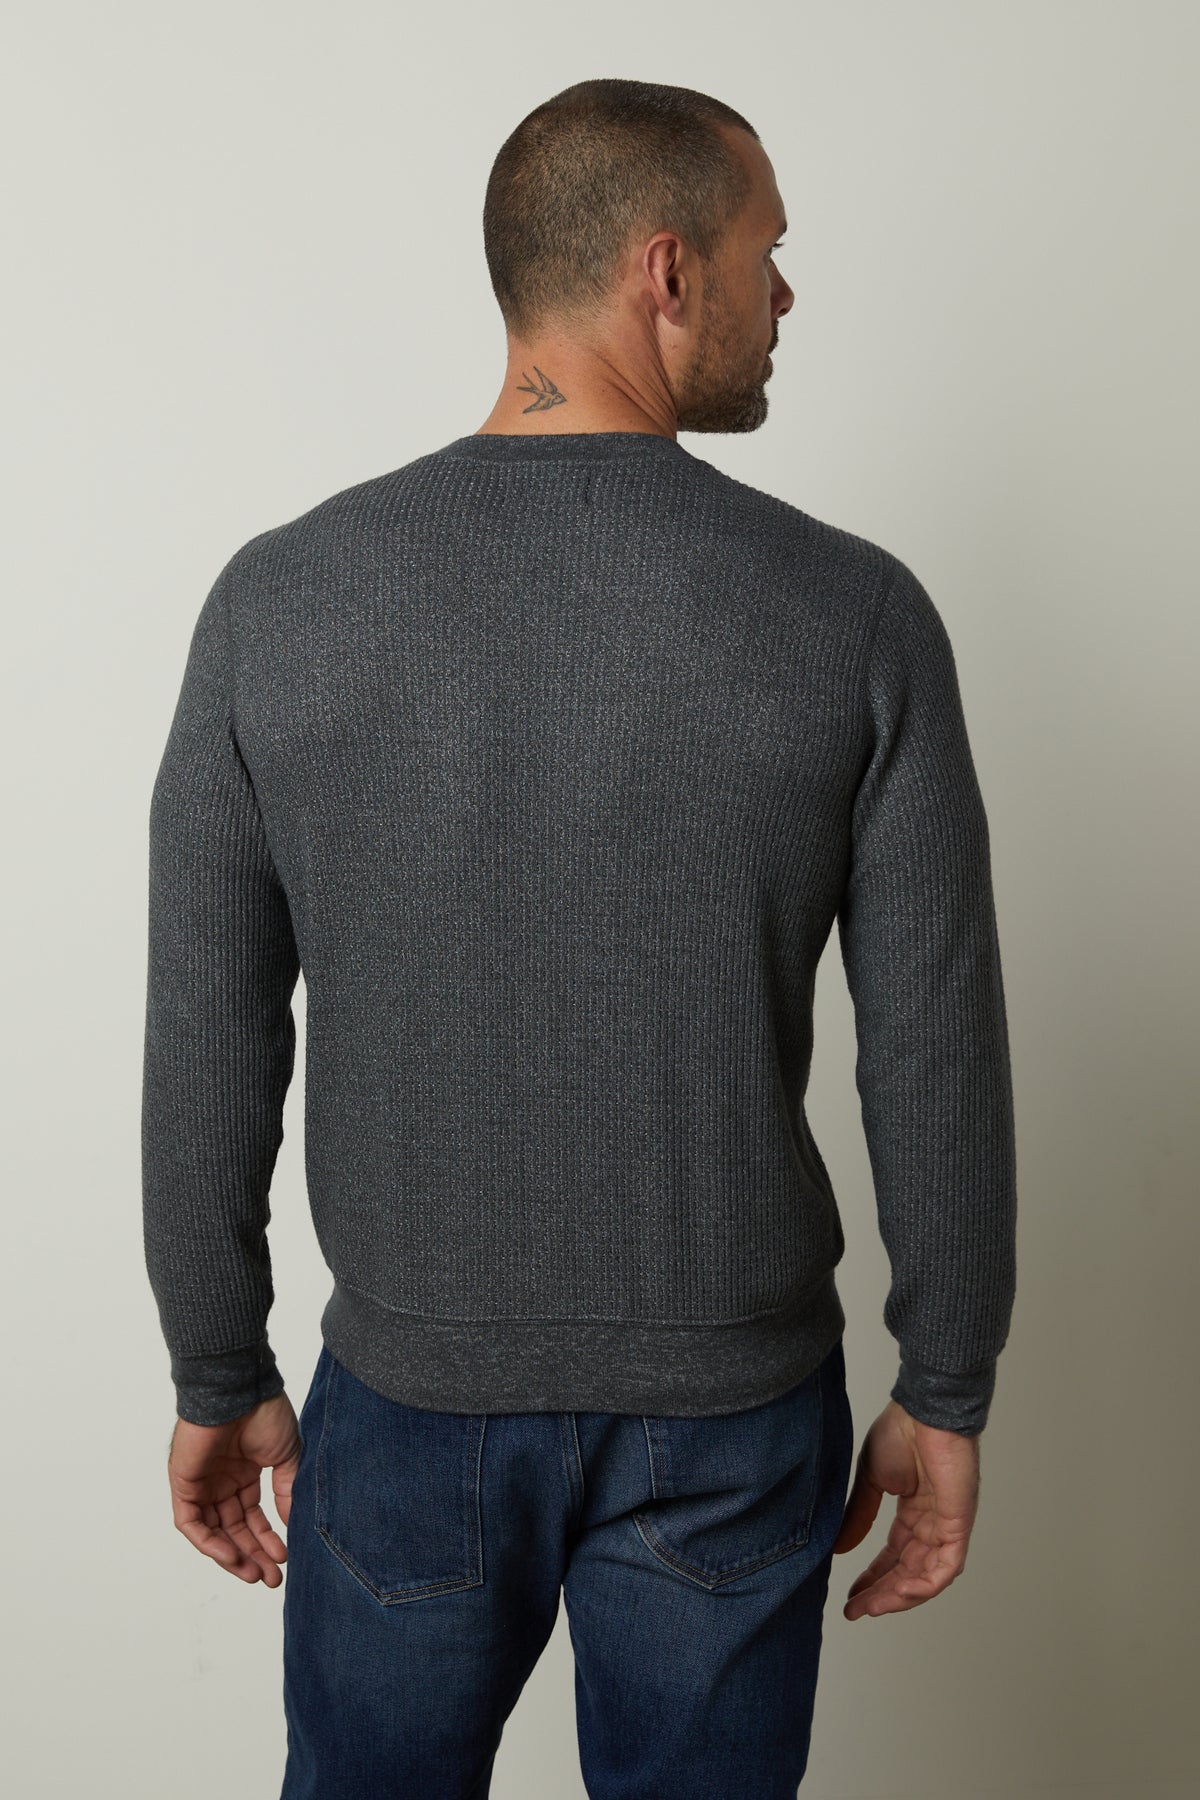 The back view of a man wearing a Velvet by Graham & Spencer PONCHO THERMAL CREW grey sweater and jeans, perfect for cooler days.-35547551563969